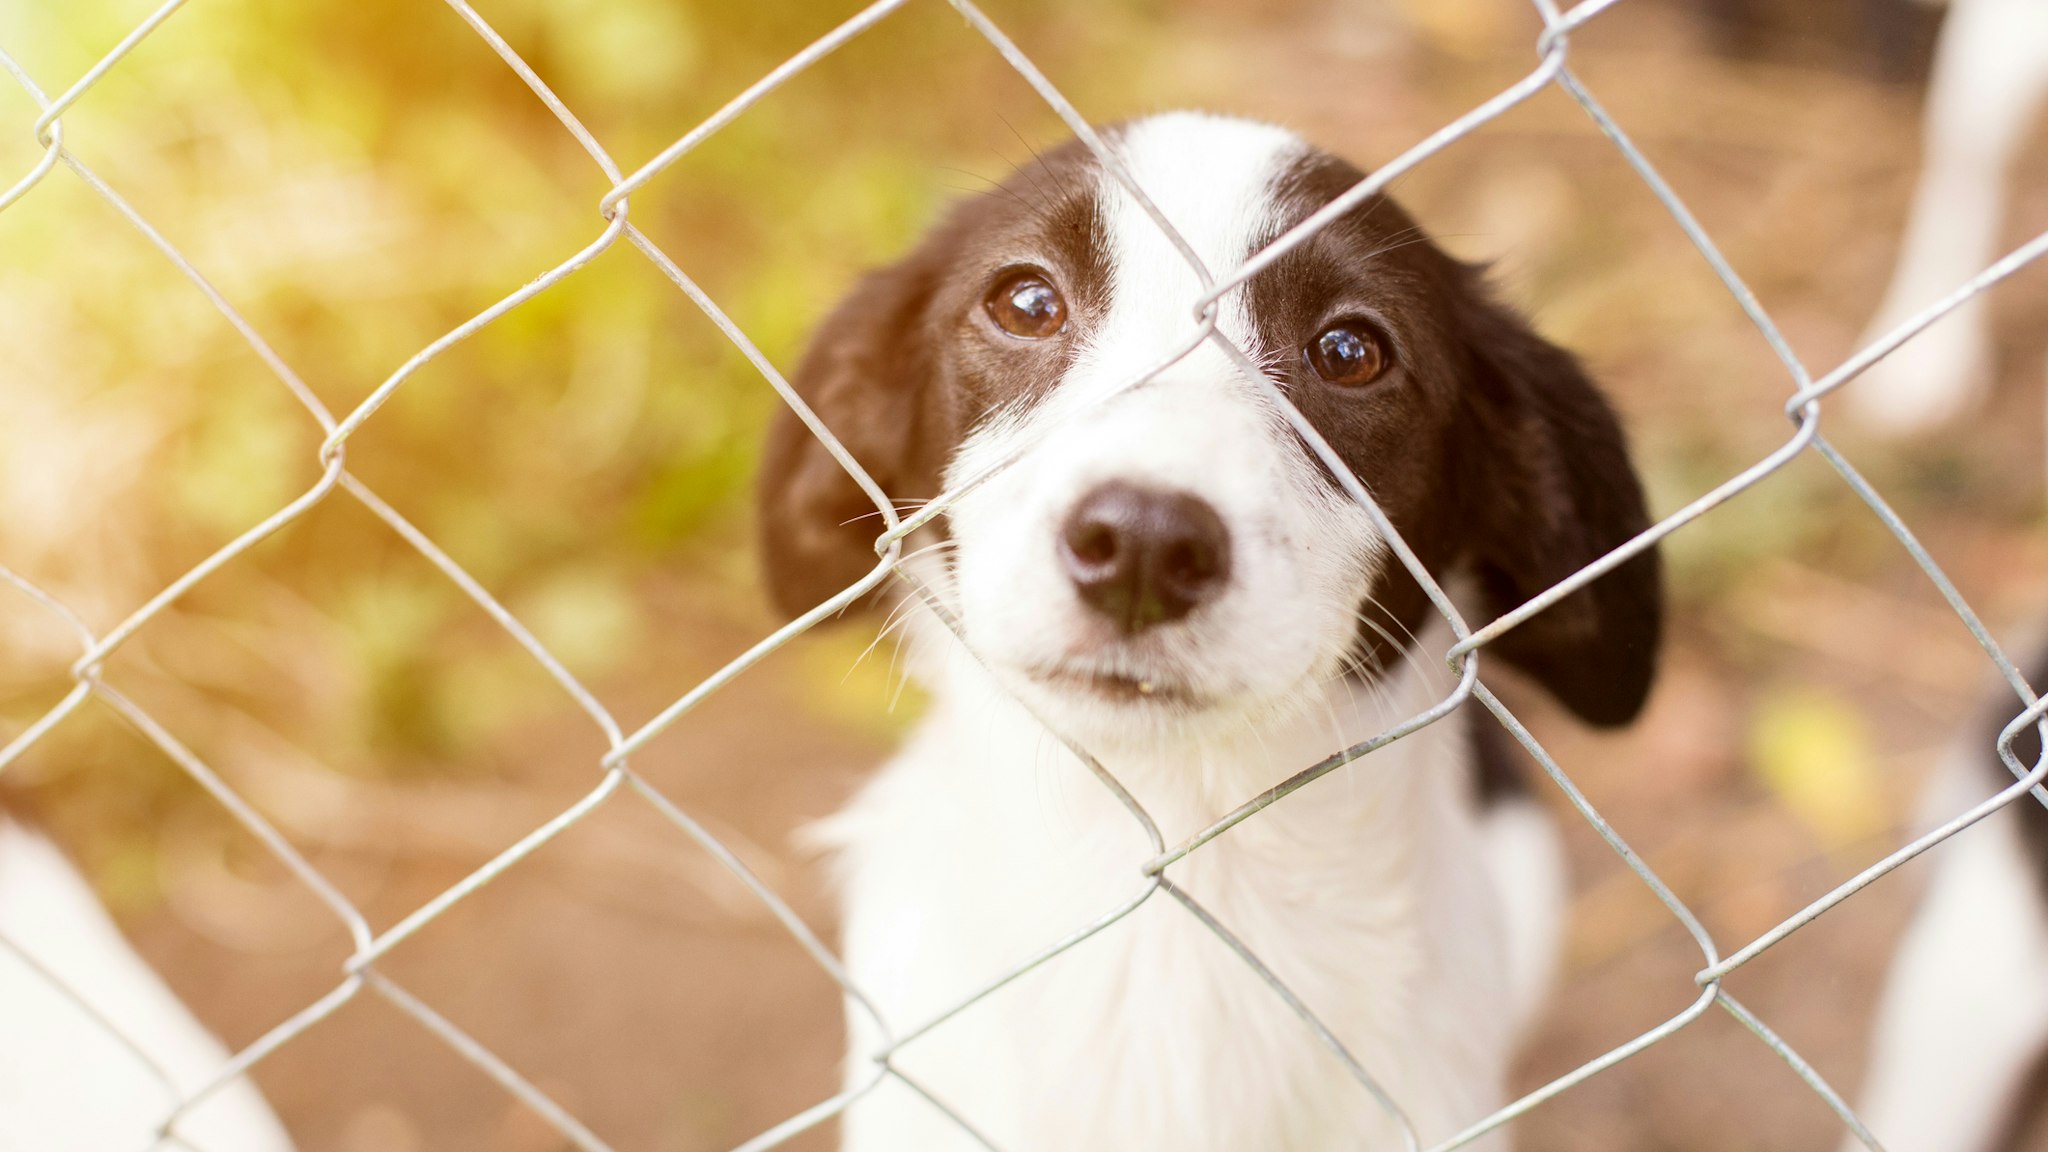 Homeless dog behind bars in an animal shelter.